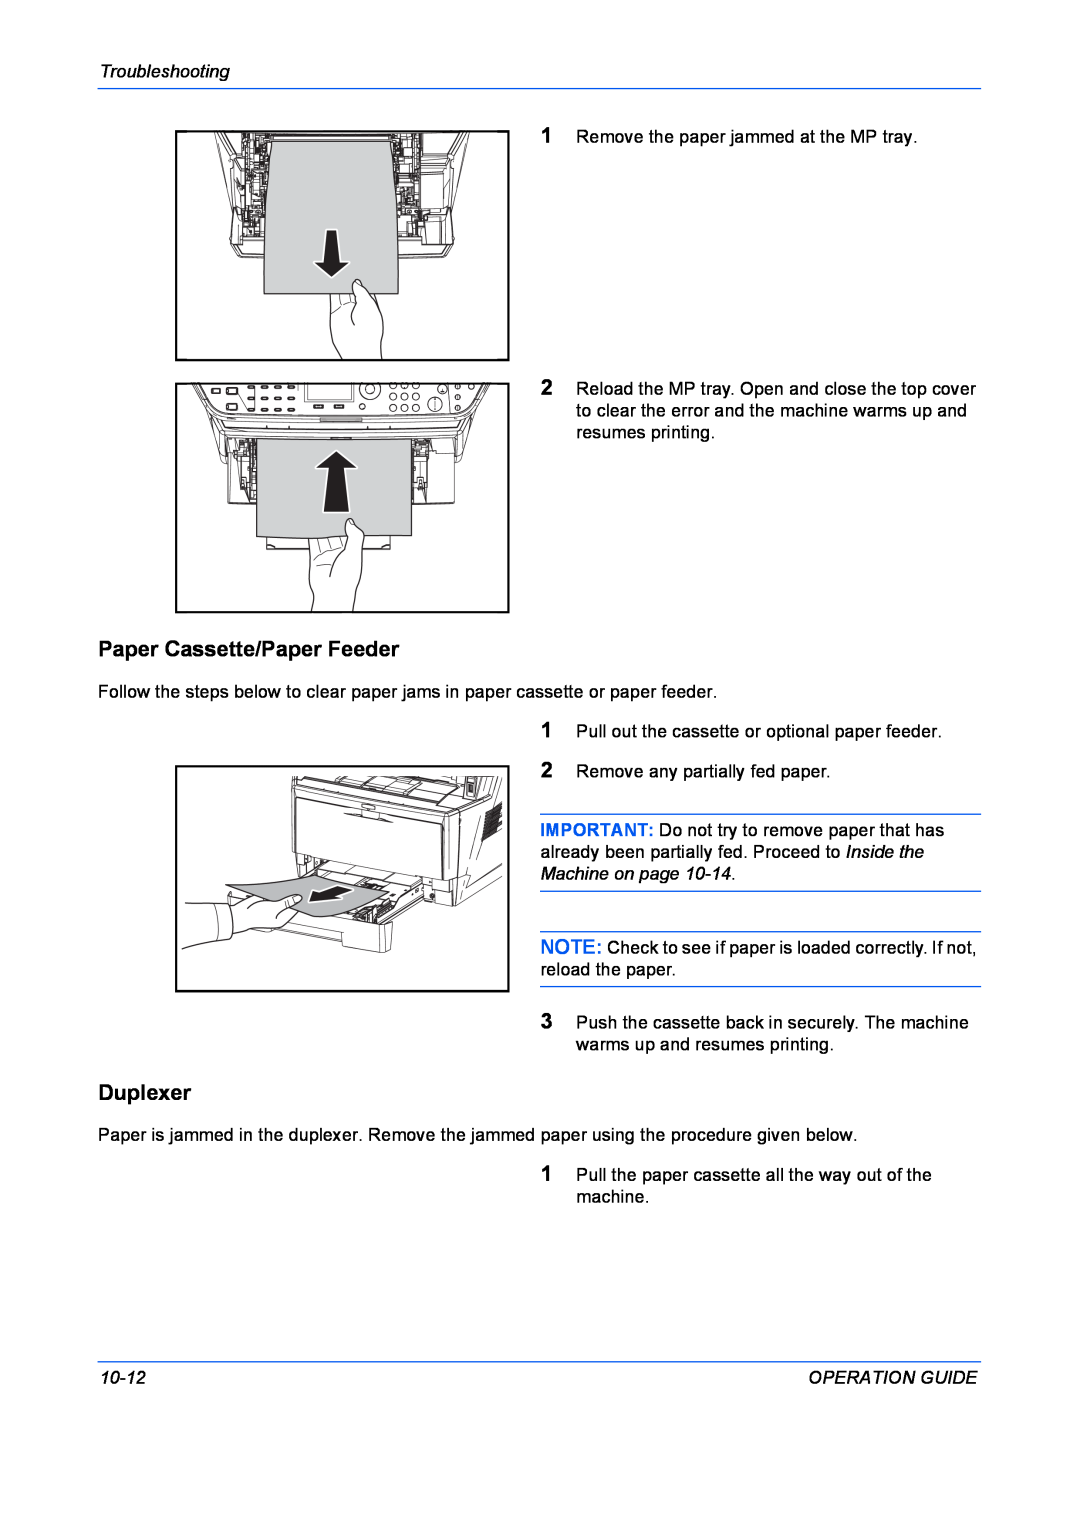 Kyocera FS-1028MFP, FS-1128MFP manual Paper Cassette/Paper Feeder, Duplexer, Troubleshooting, 10-12, Operation Guide 